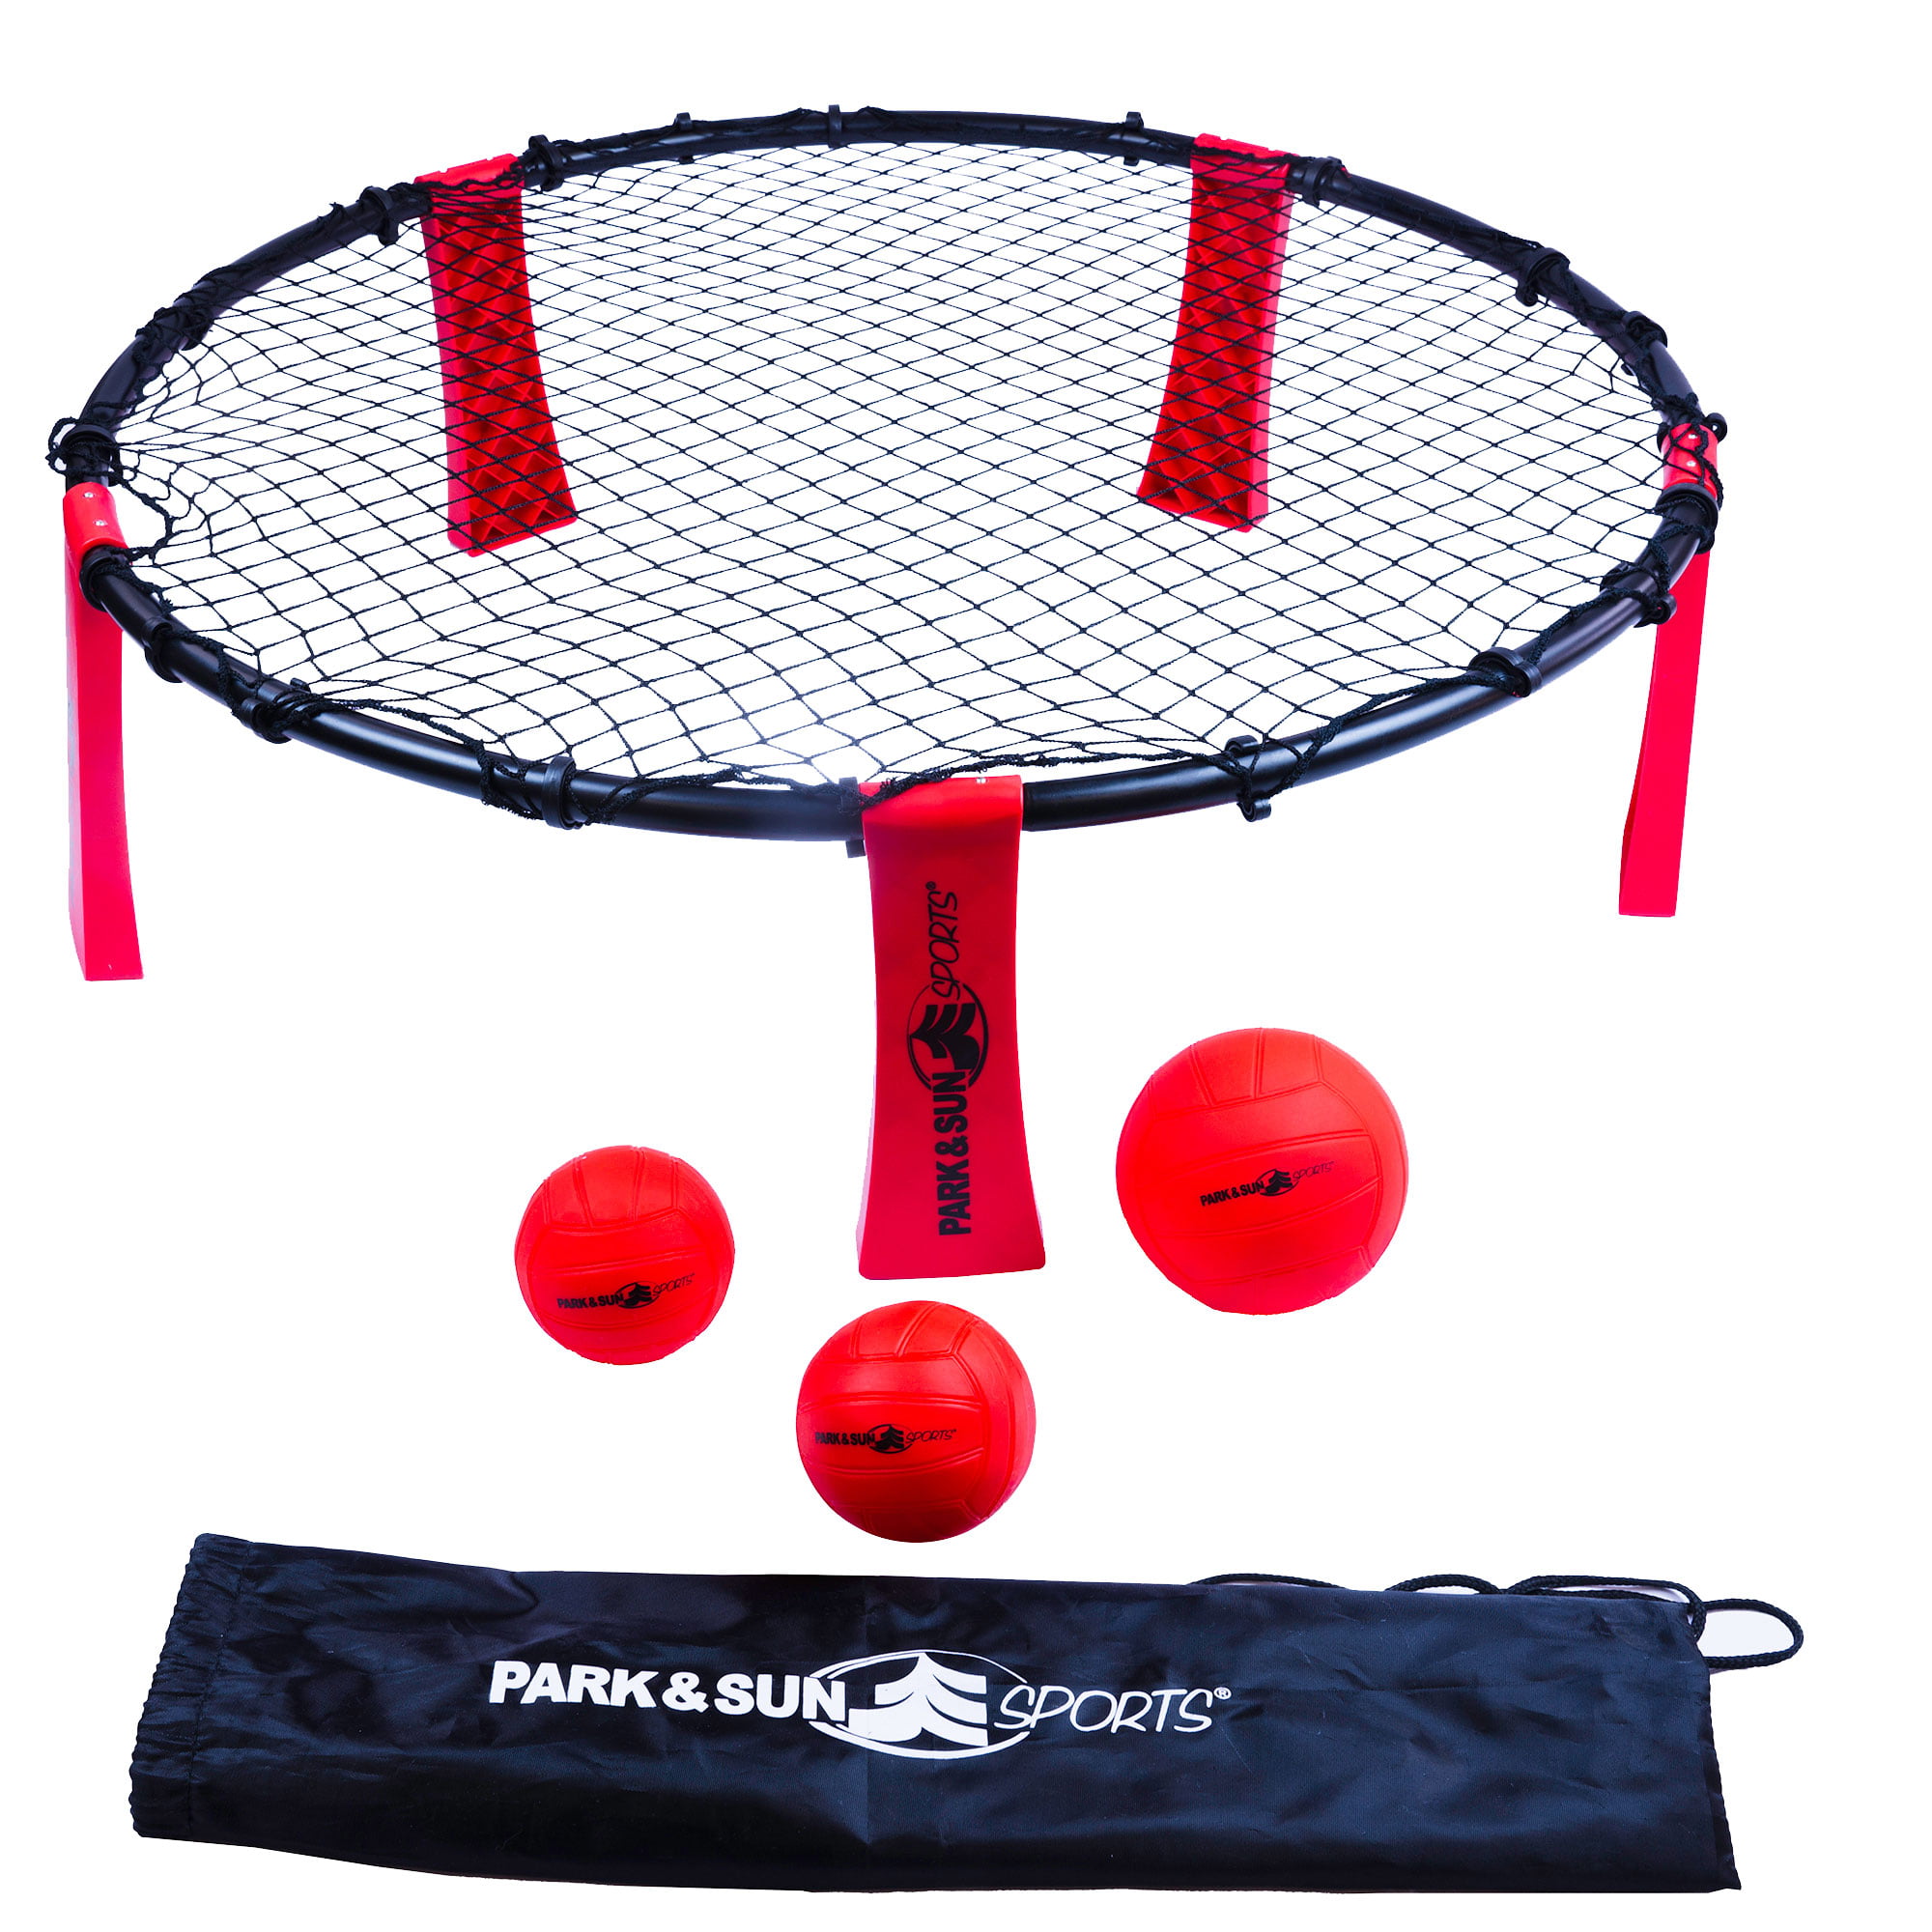 Park and Sun Sports Rally Fire Spike Volleyball Game Set for sale online 